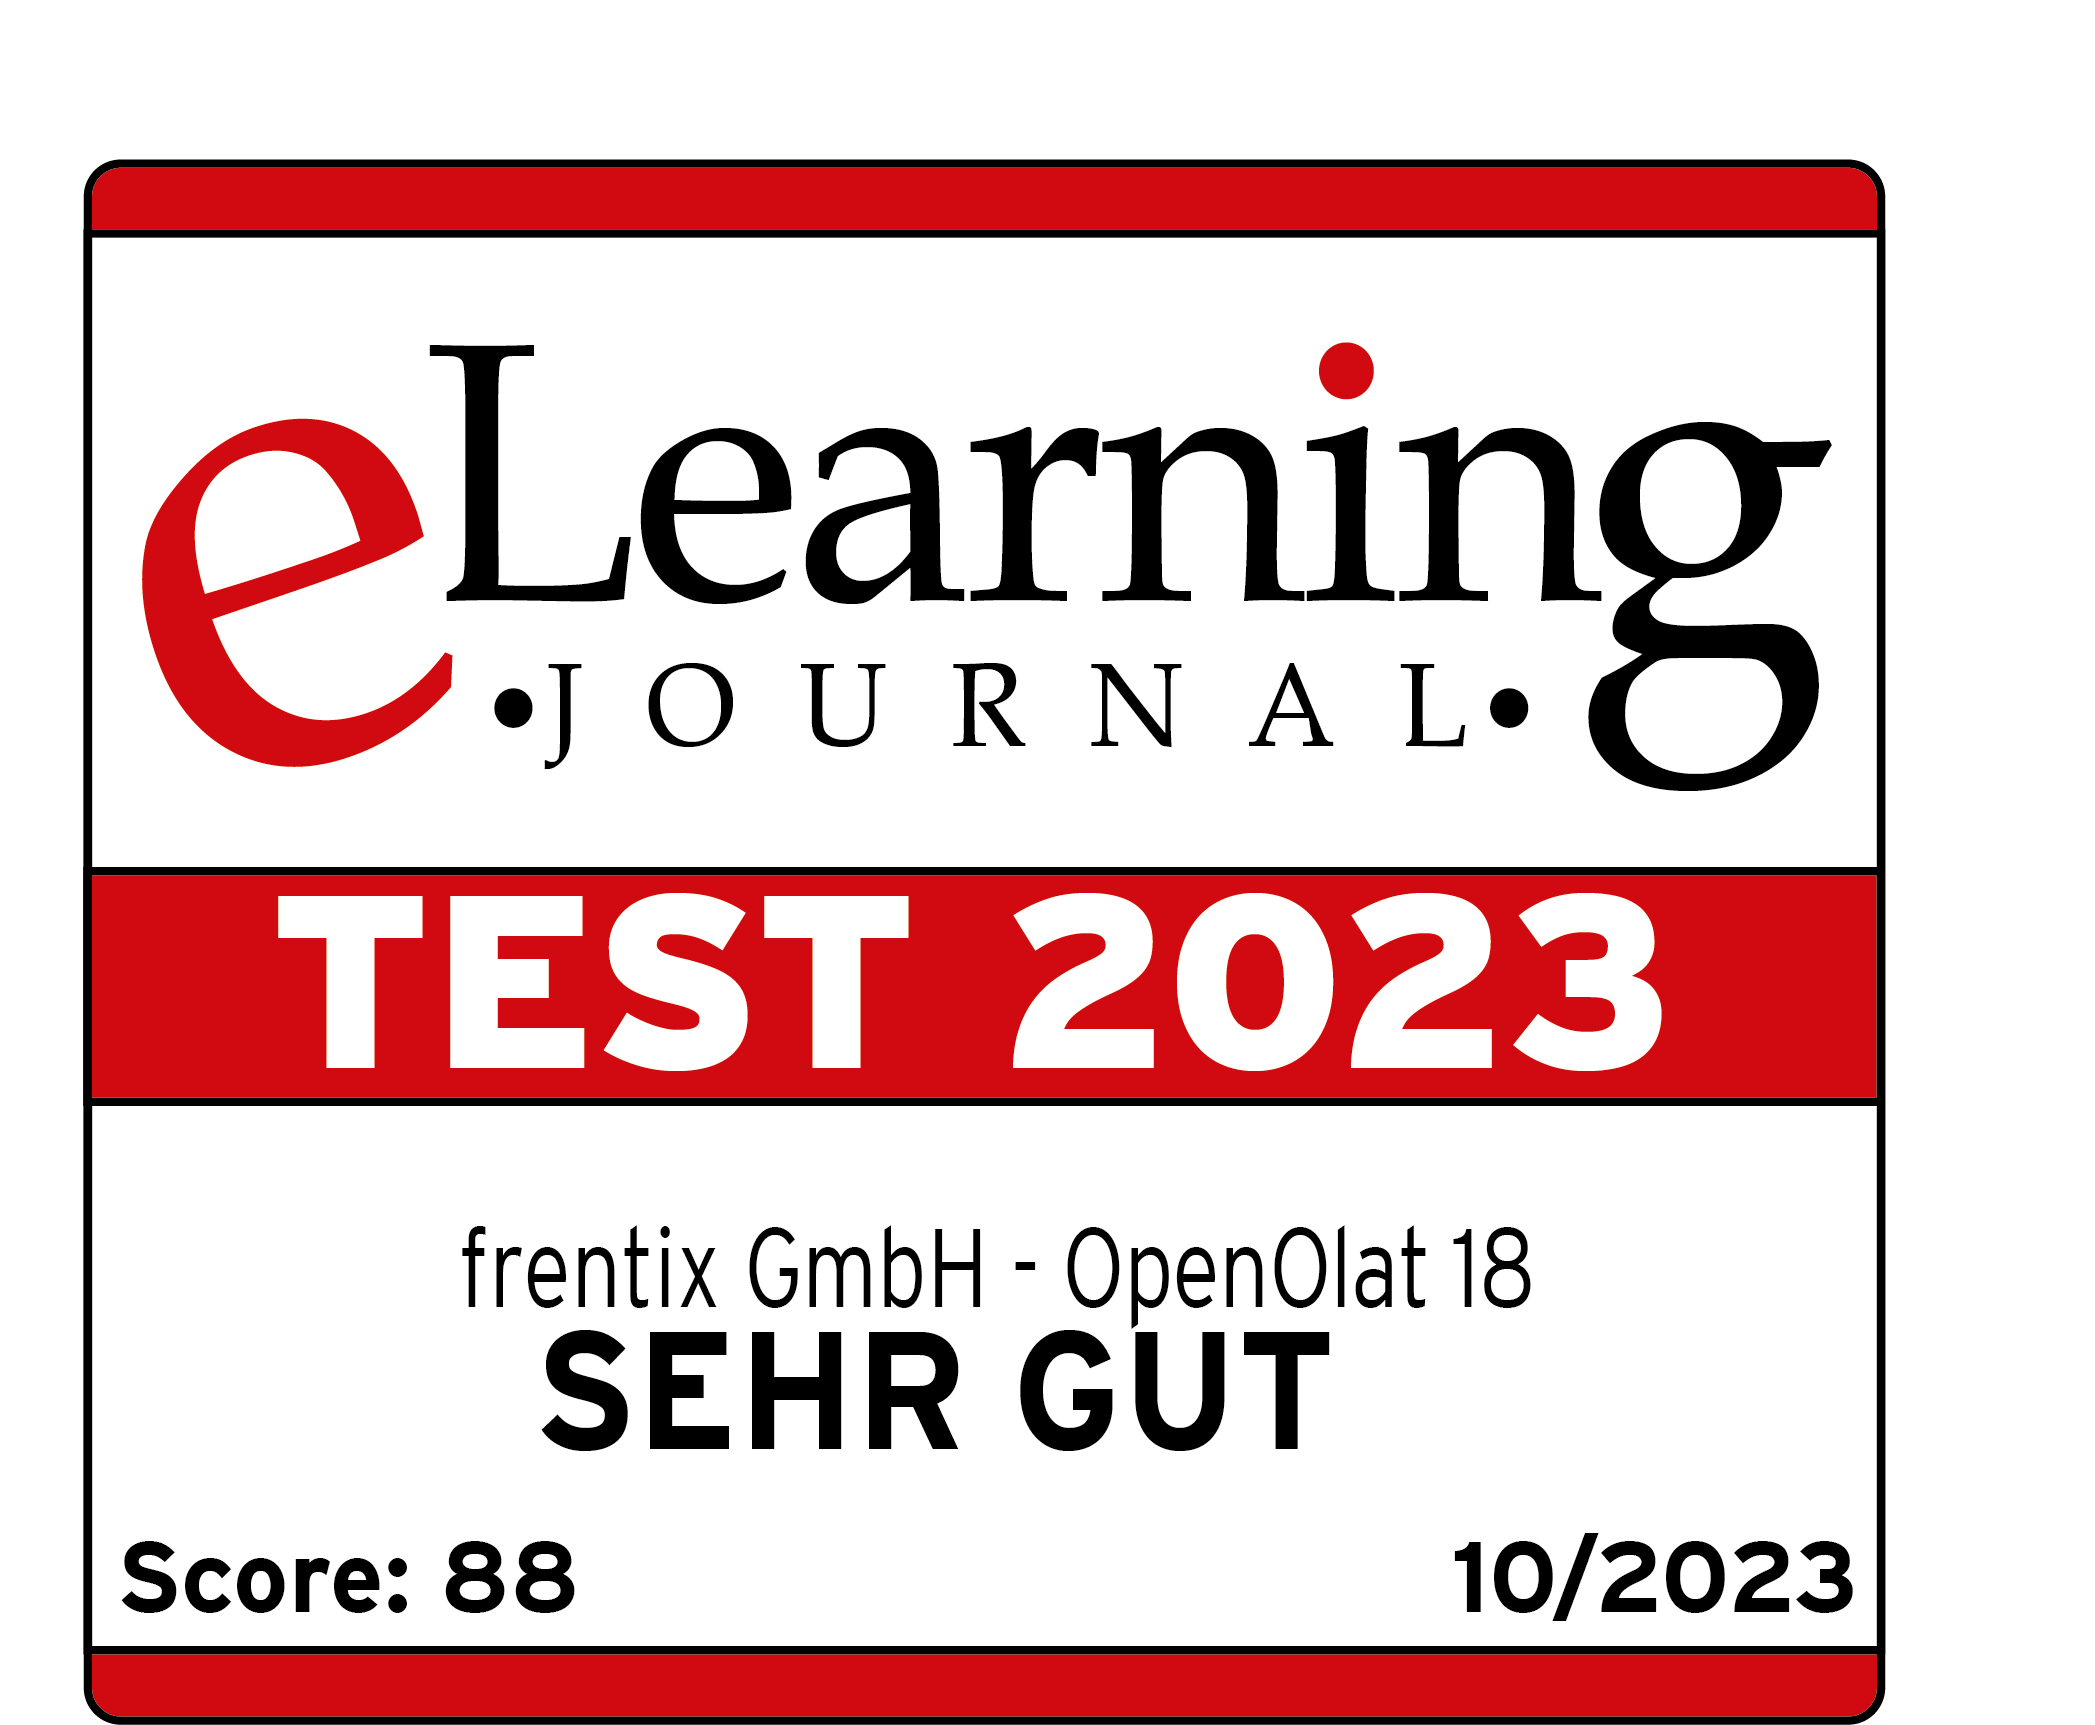 The OpenOlat LMS got a high score in the e-learning journal ranking